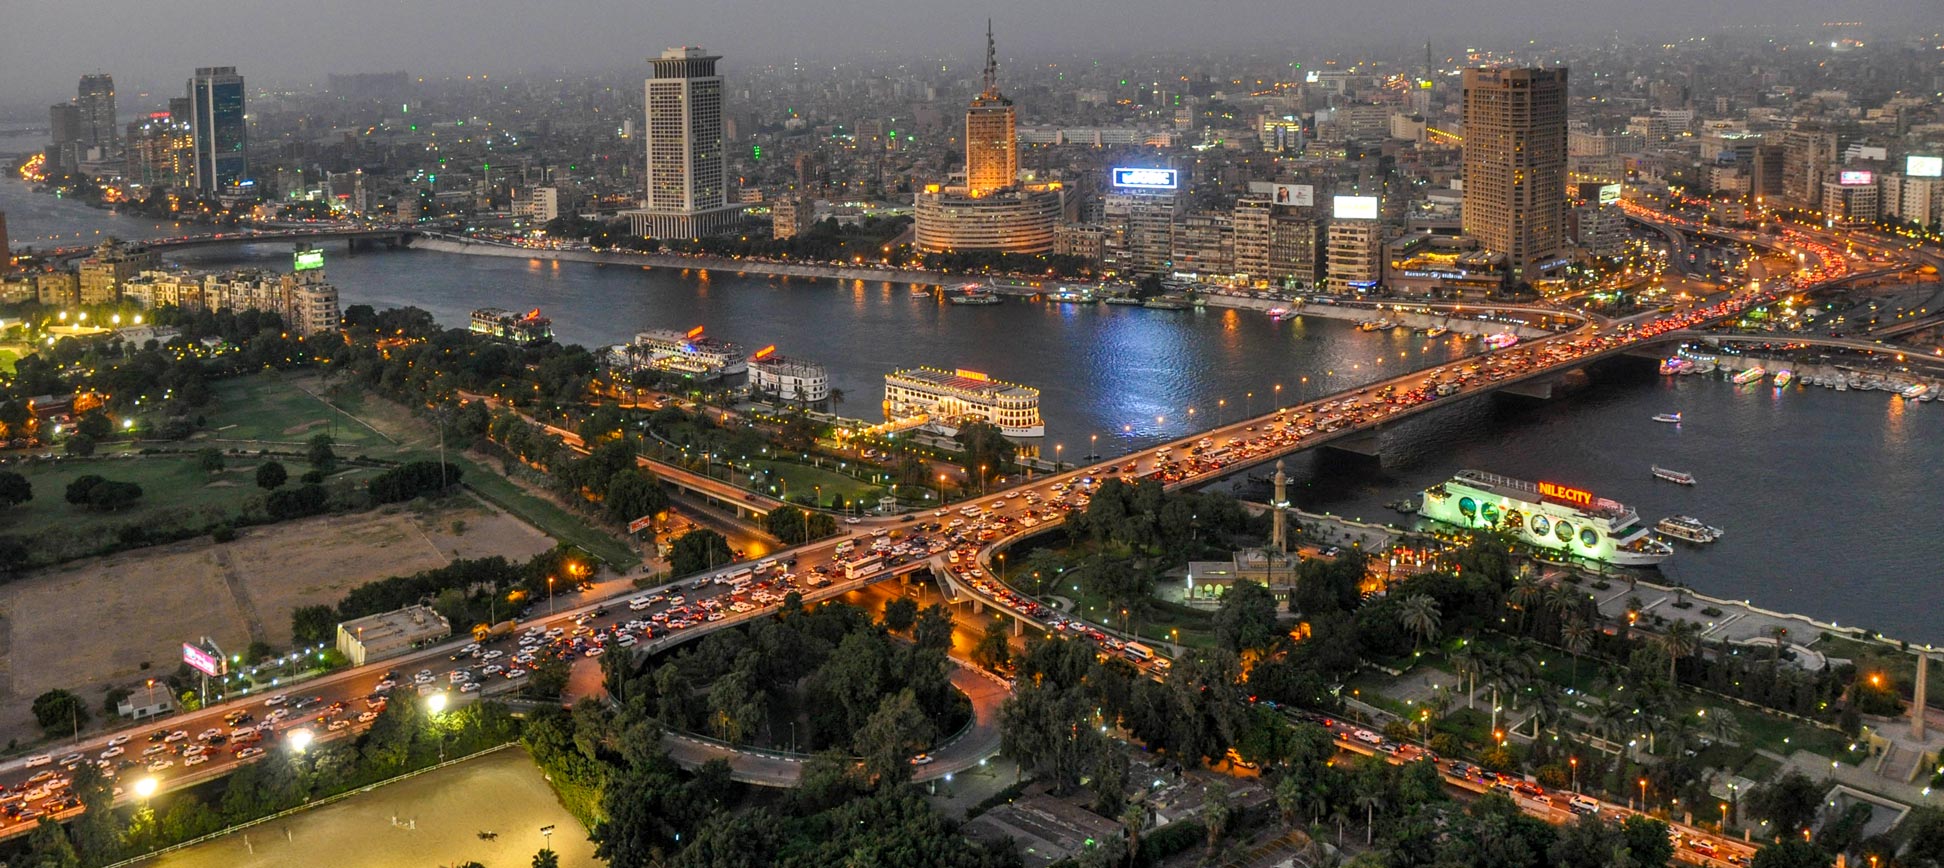 Downtown Cairo and the 6th October Bridge over the Nile